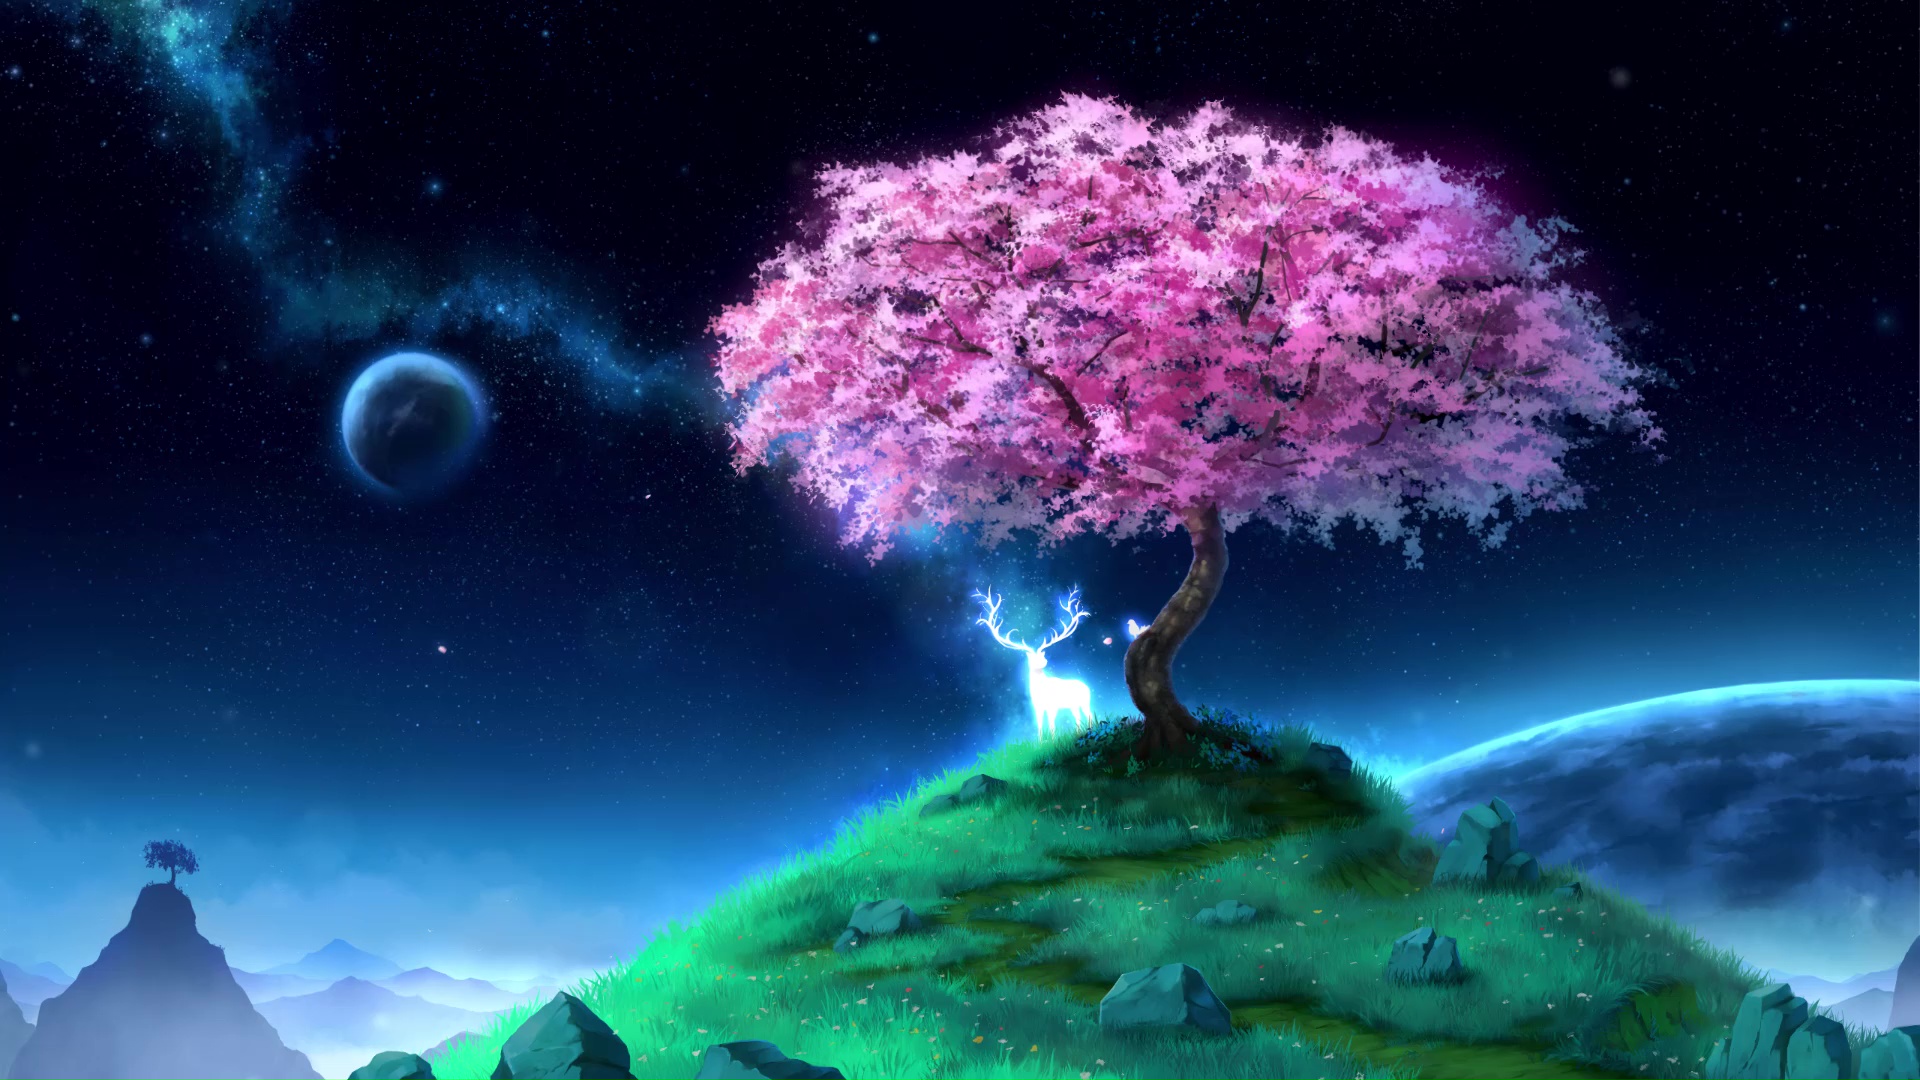 Beautiful Tree - Cherry Blossom - Sky Background Wallpaper Download | MobCup